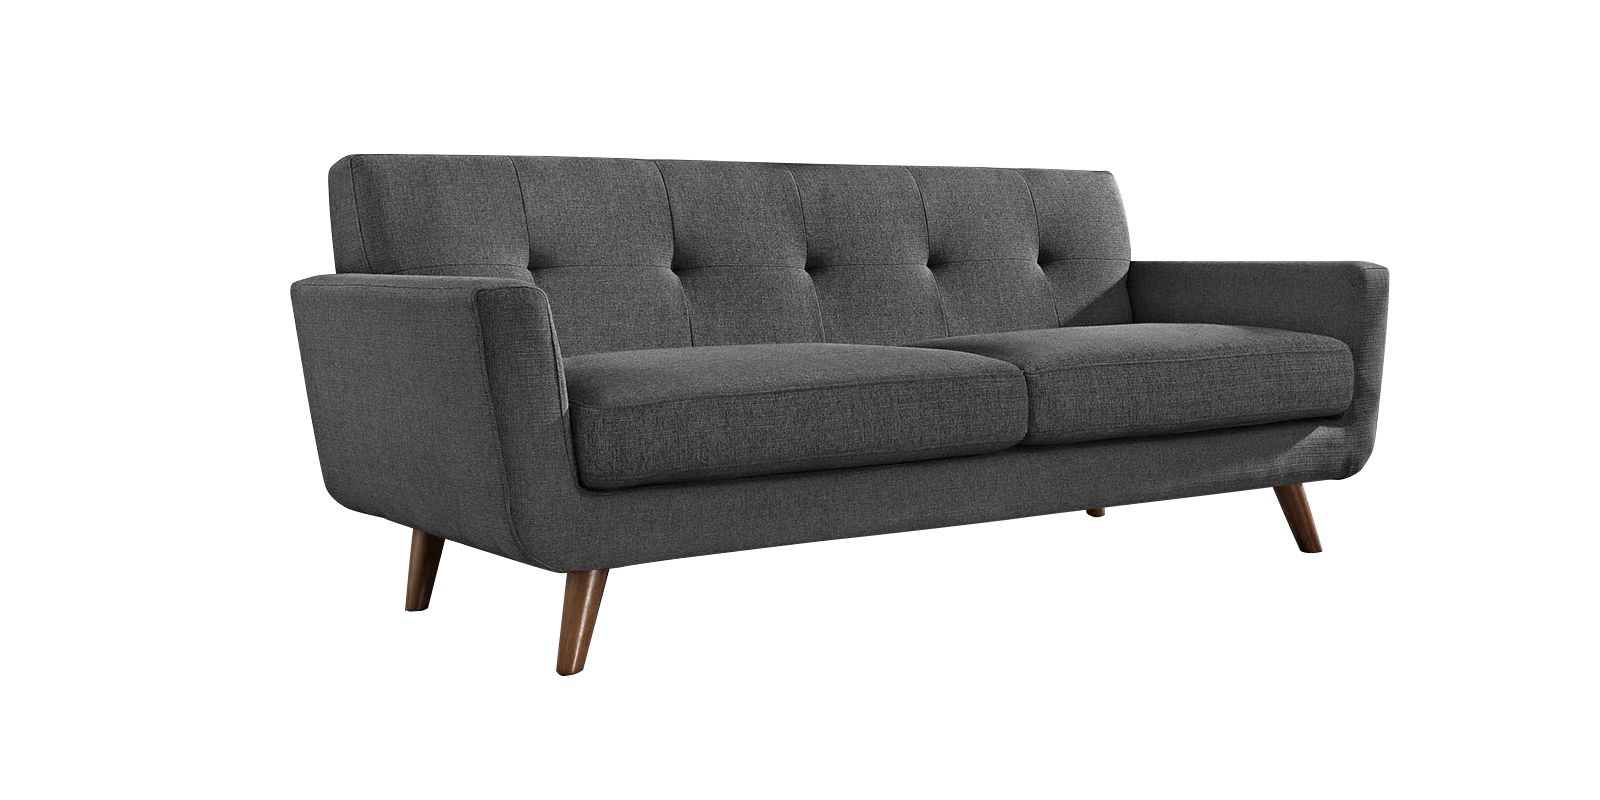 Mid Century Classic 3 Seater Sofa In Grey Colour – Dreamzz Furniture |  Online Furniture Shop Pertaining To Mid Century 3 Seat Couches (View 9 of 15)